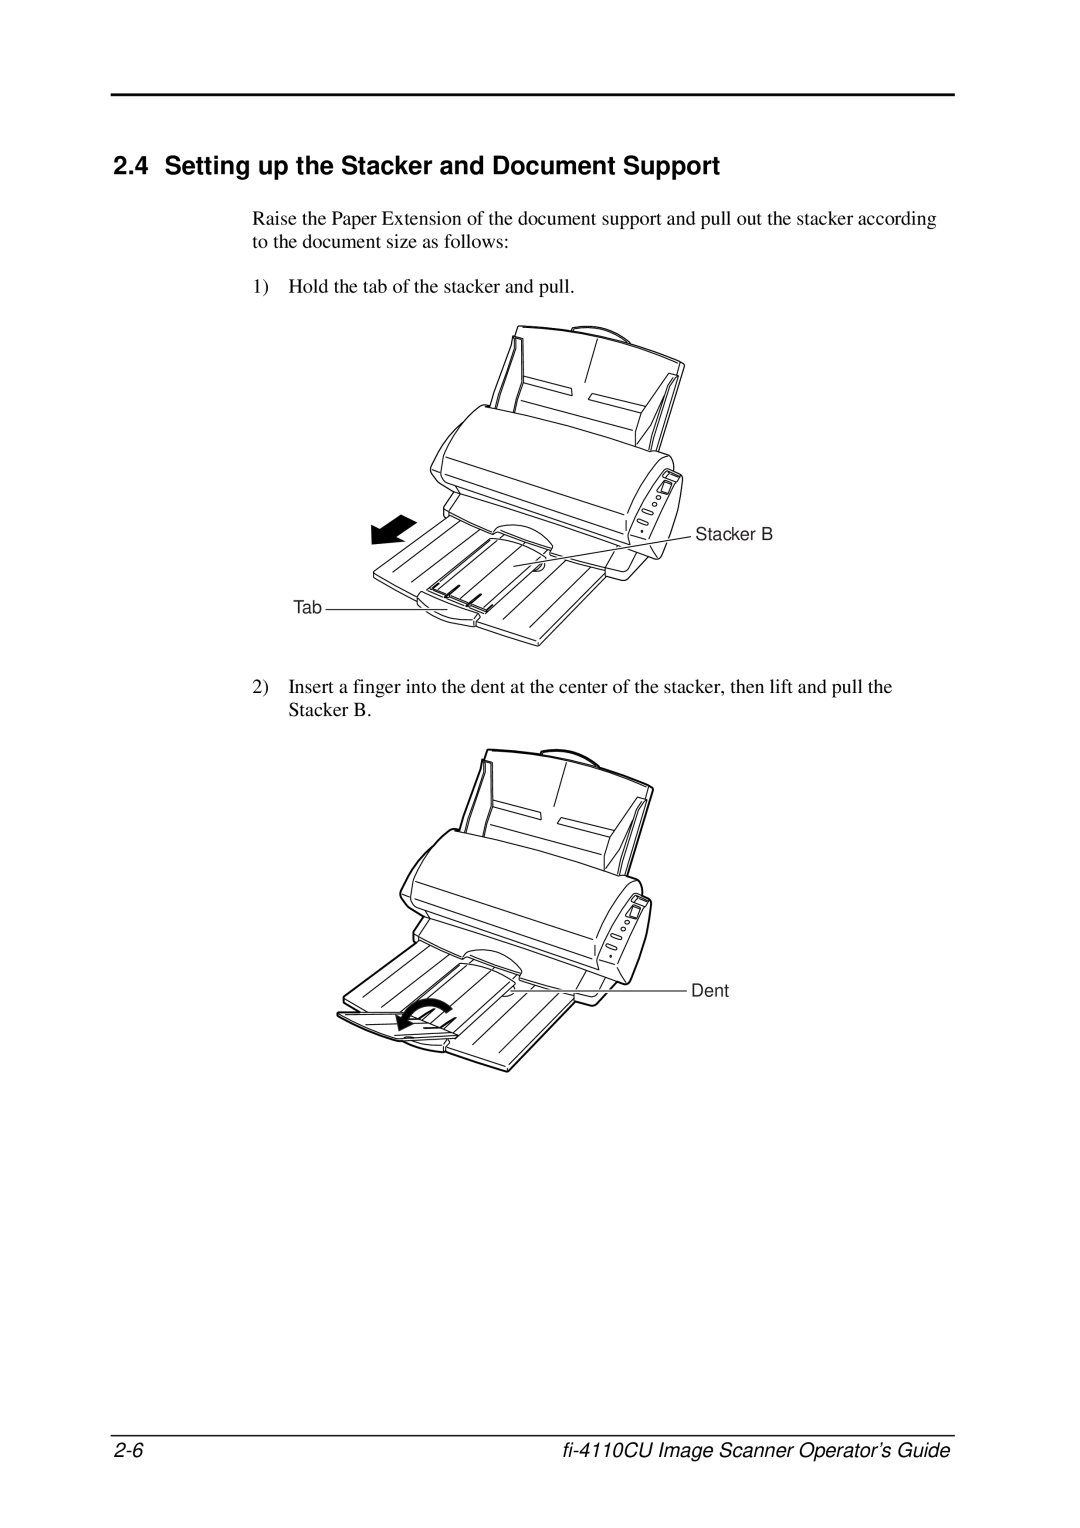 Fujitsu C150-E194-01EN manual Setting up the Stacker and Document Support, fi-4110CU Image Scanner Operator’s Guide 